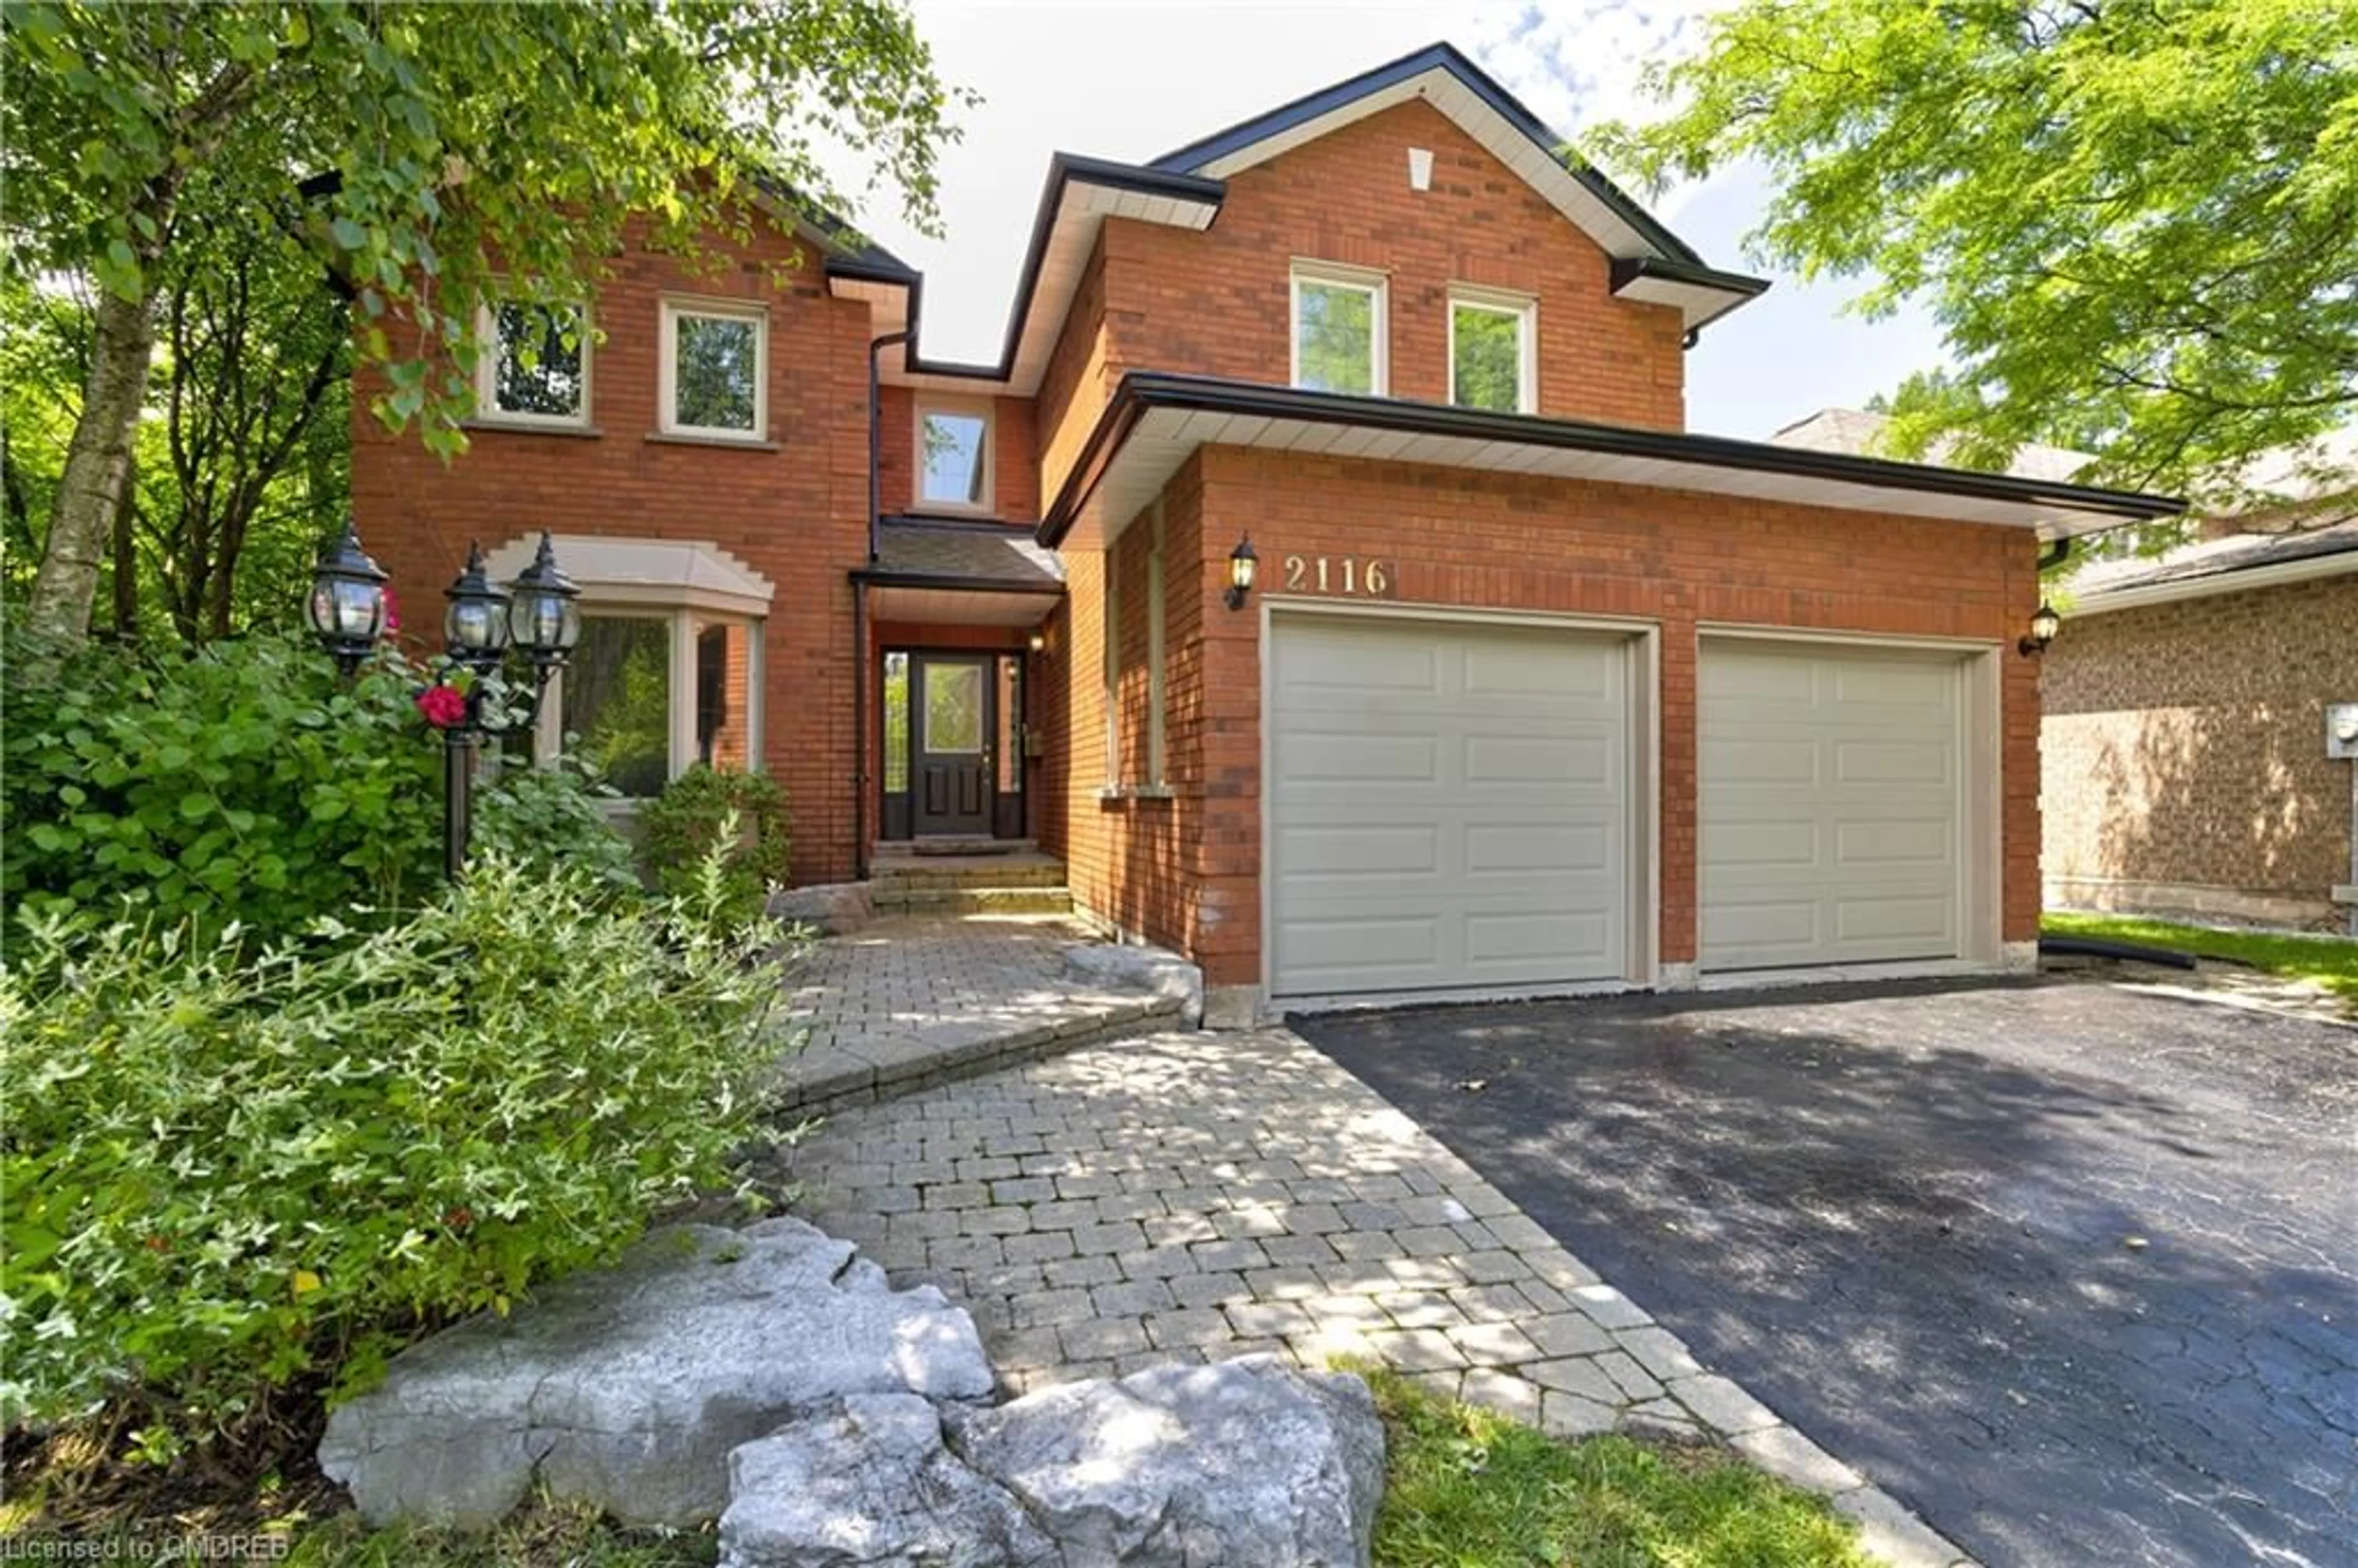 Home with brick exterior material for 2116 Munn's Ave, Oakville Ontario L6H 4K4